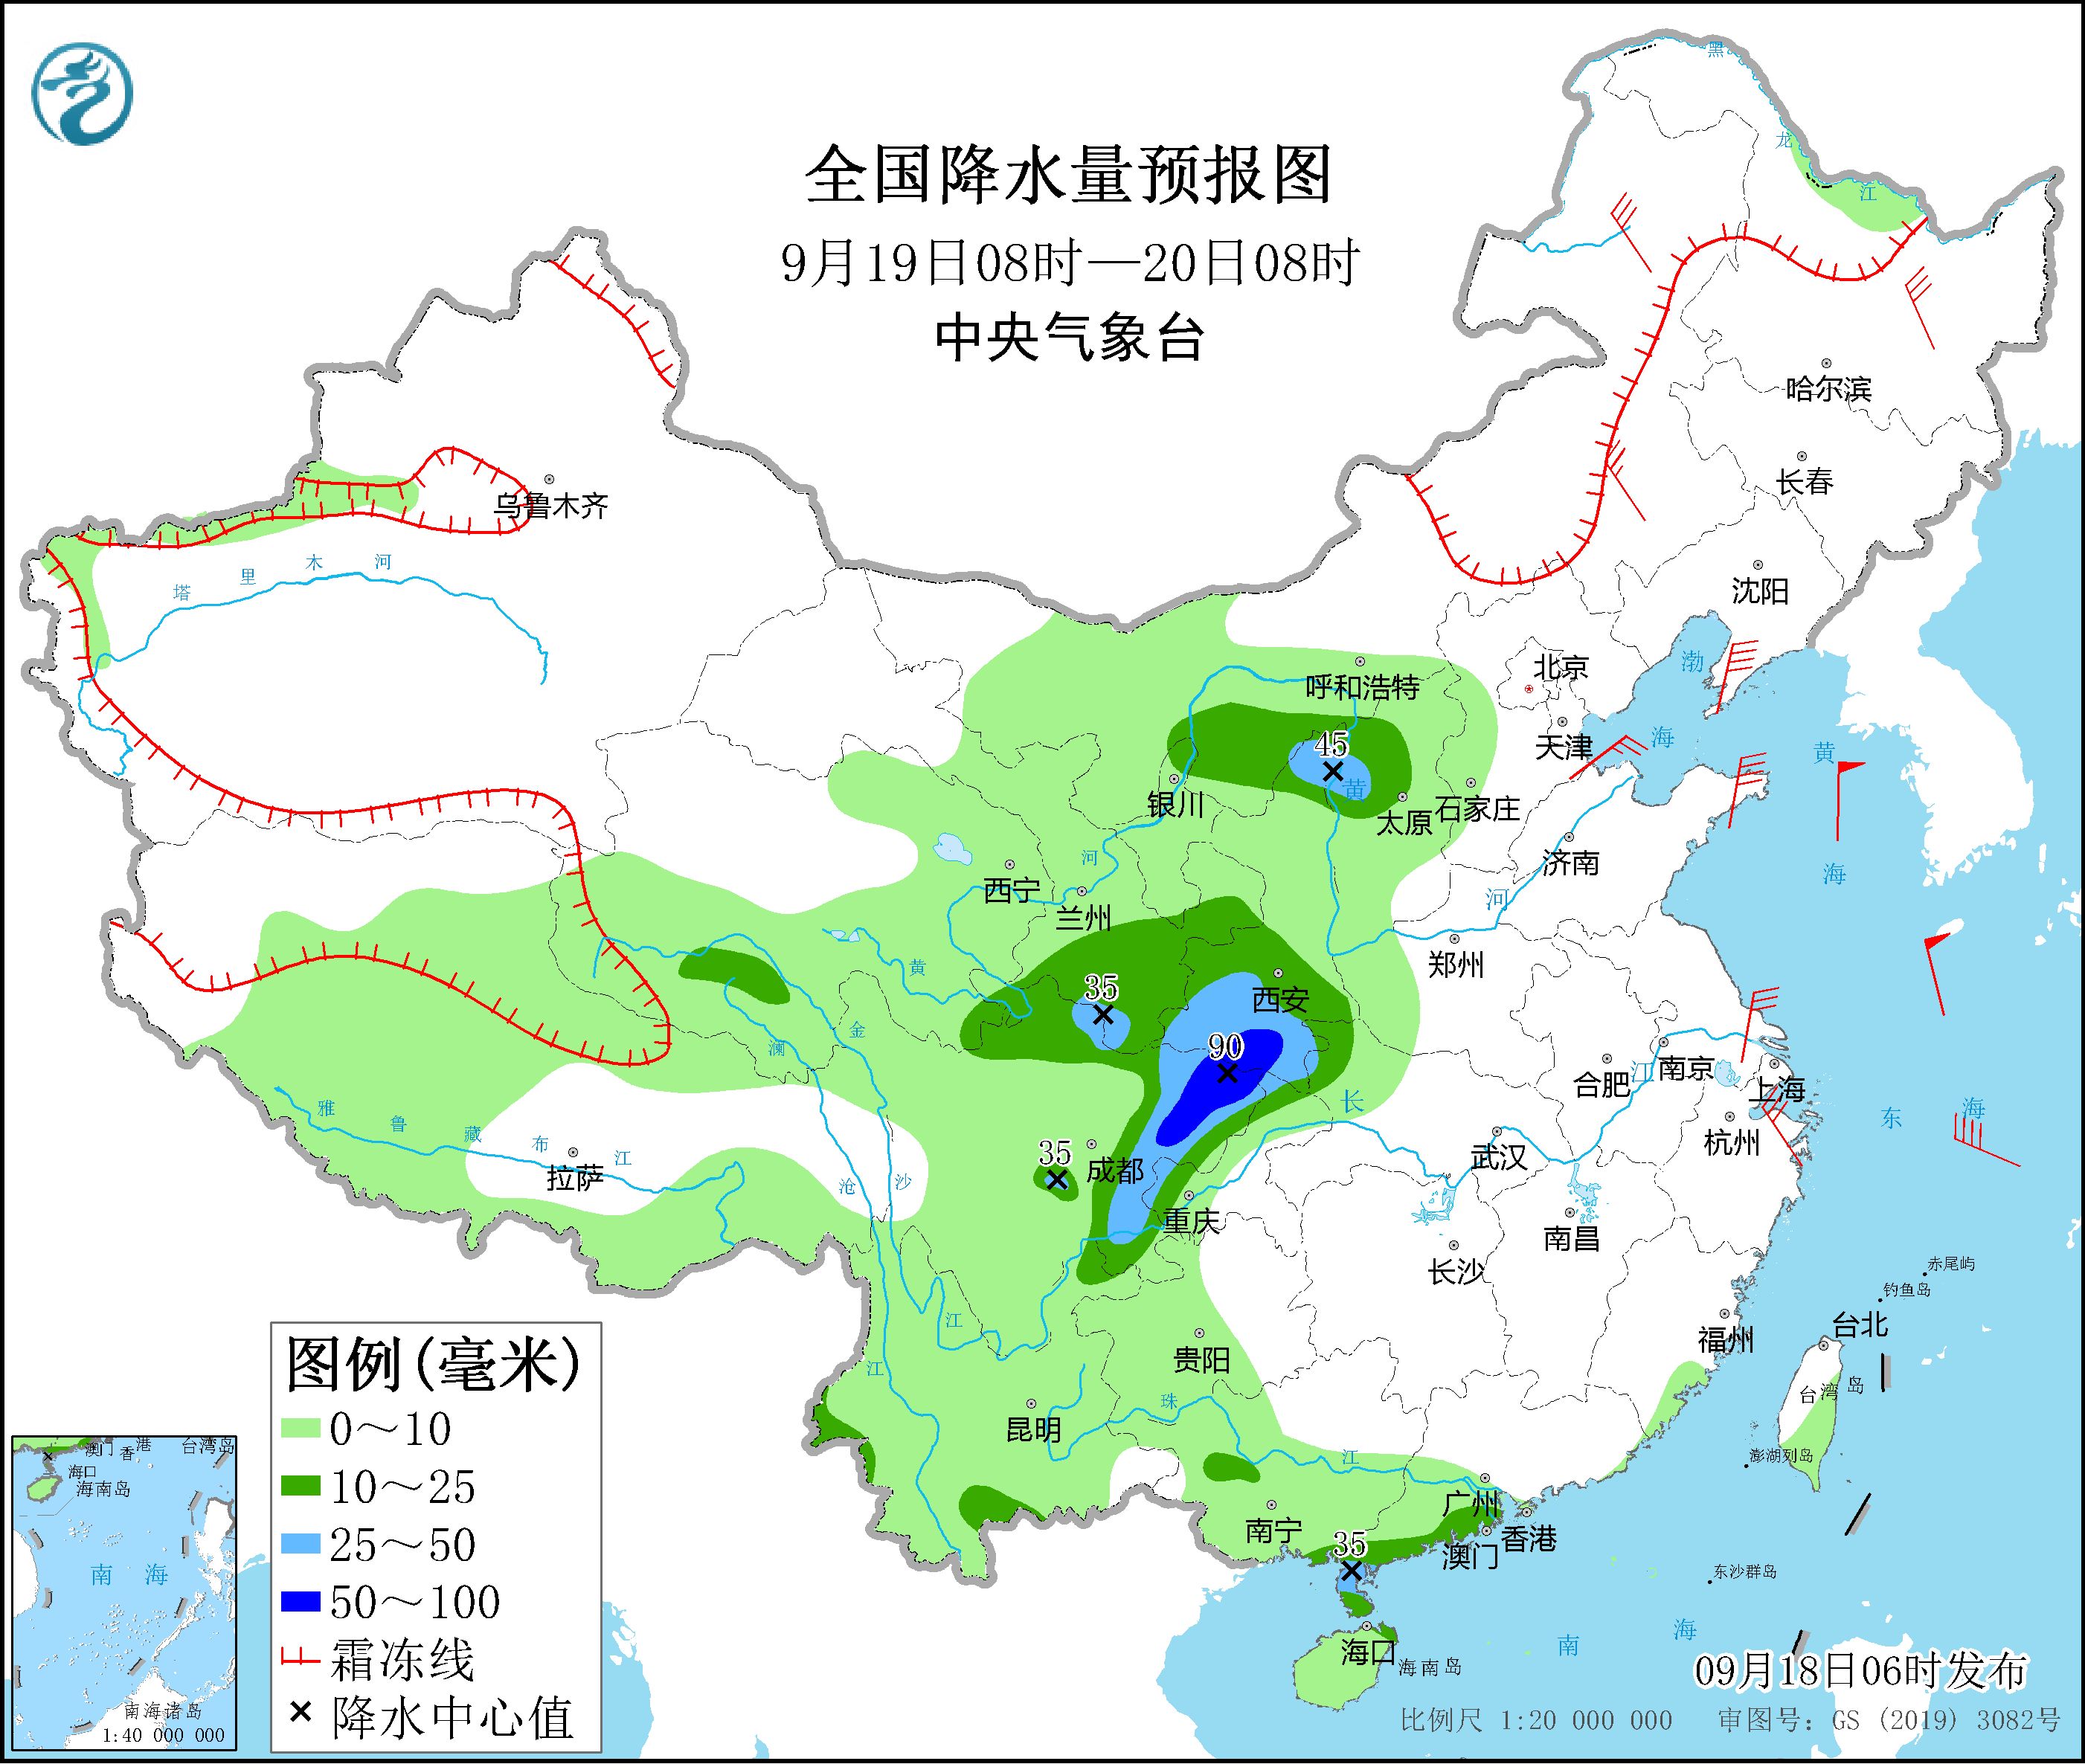 There will be moderate to heavy rain in the eastern and southwestern regions of the northwest region, and there will be strong winds in the northern and eastern sea areas of my country.